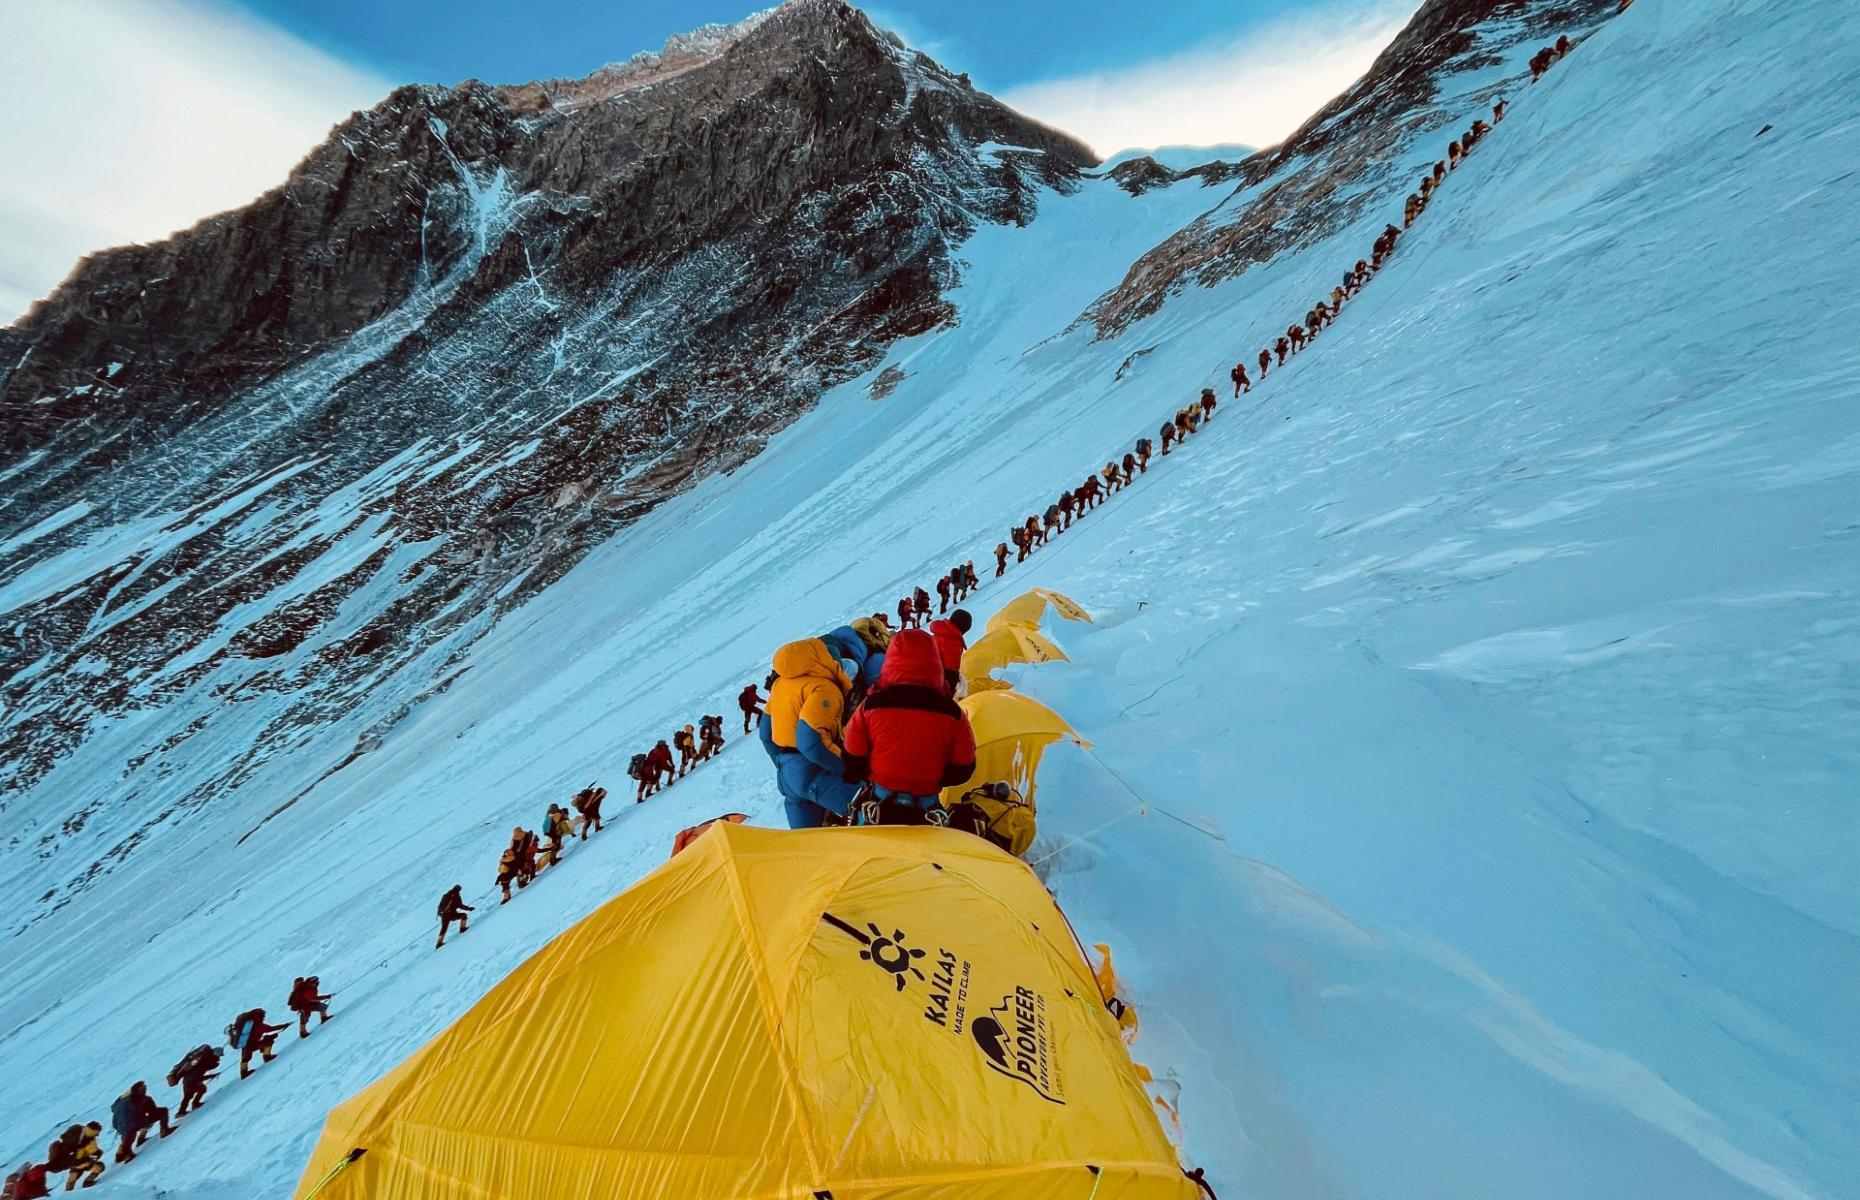 <p>Unfortunately, the increased popularity of Everest expeditions has led to <a href="https://www.bbc.co.uk/news/world-asia-48401491">overcrowding on the summit</a>. Lines are normal in climbing season, when weather conditions often mean there’s only a short window in which the summit can be reached, but these so-called traffic jams can also be worsened by inexperienced climbers holding up the line. Overcrowding can be extremely dangerous and many Sherpas have called for greater restrictions on tour operators, and a reduction in the number of climbers, to make it safer.</p>